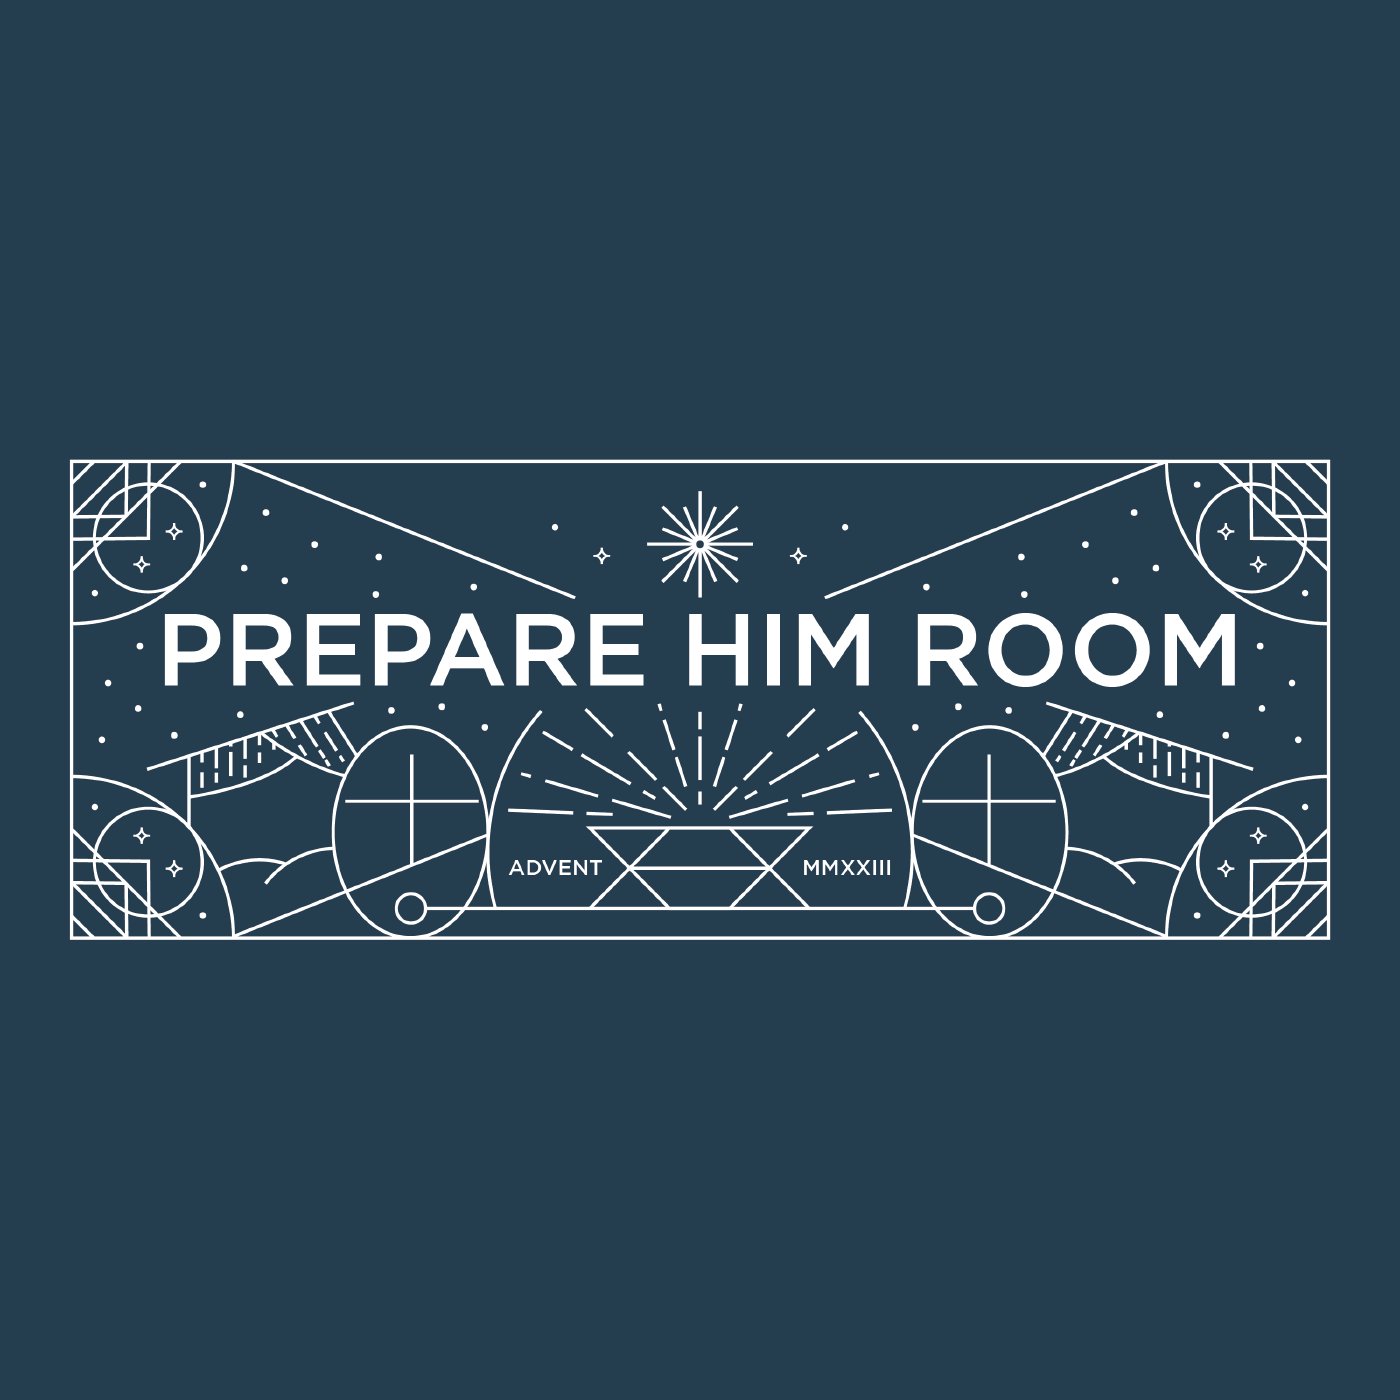 "Prepare Room In Your Heart For Extravagant Worship"